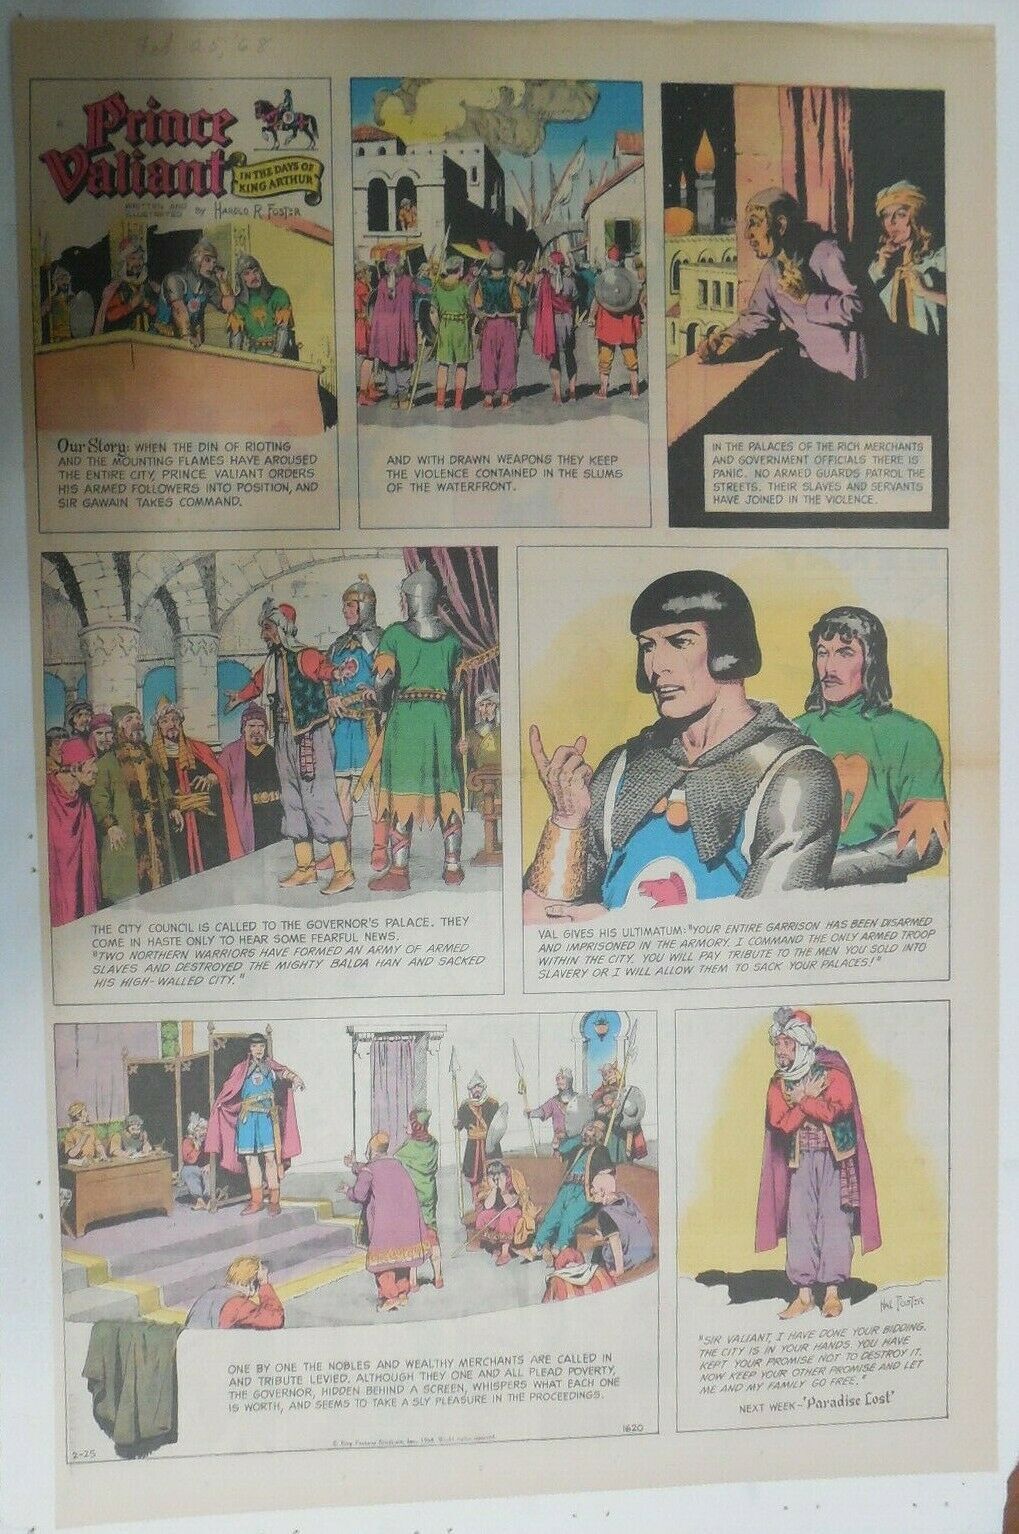 Age,　Foster　Valiant　by　Books　Valiant　Page　HipComic　from　Size　Full　Modern　2/25/1968　Sunday　Comic　#1620　Prince　Rare　Hal　Prince